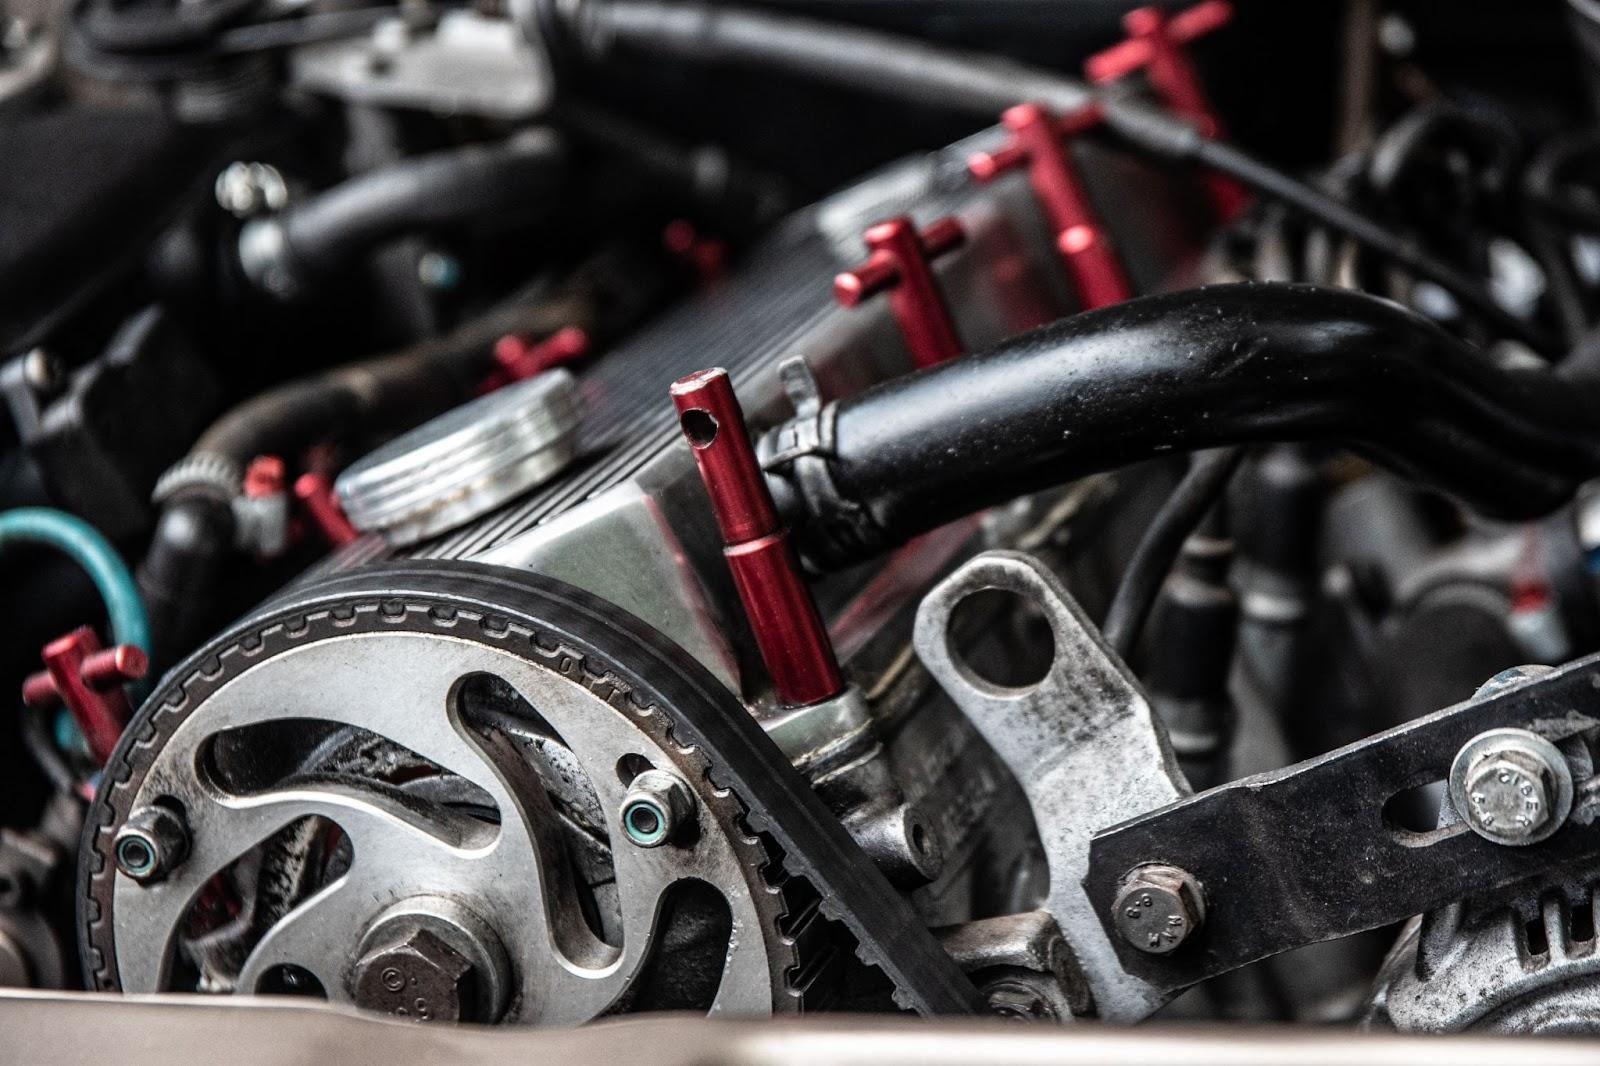 Timing Belt Service at ﻿Northuis Auto Repair﻿ in ﻿Jenison, MI﻿